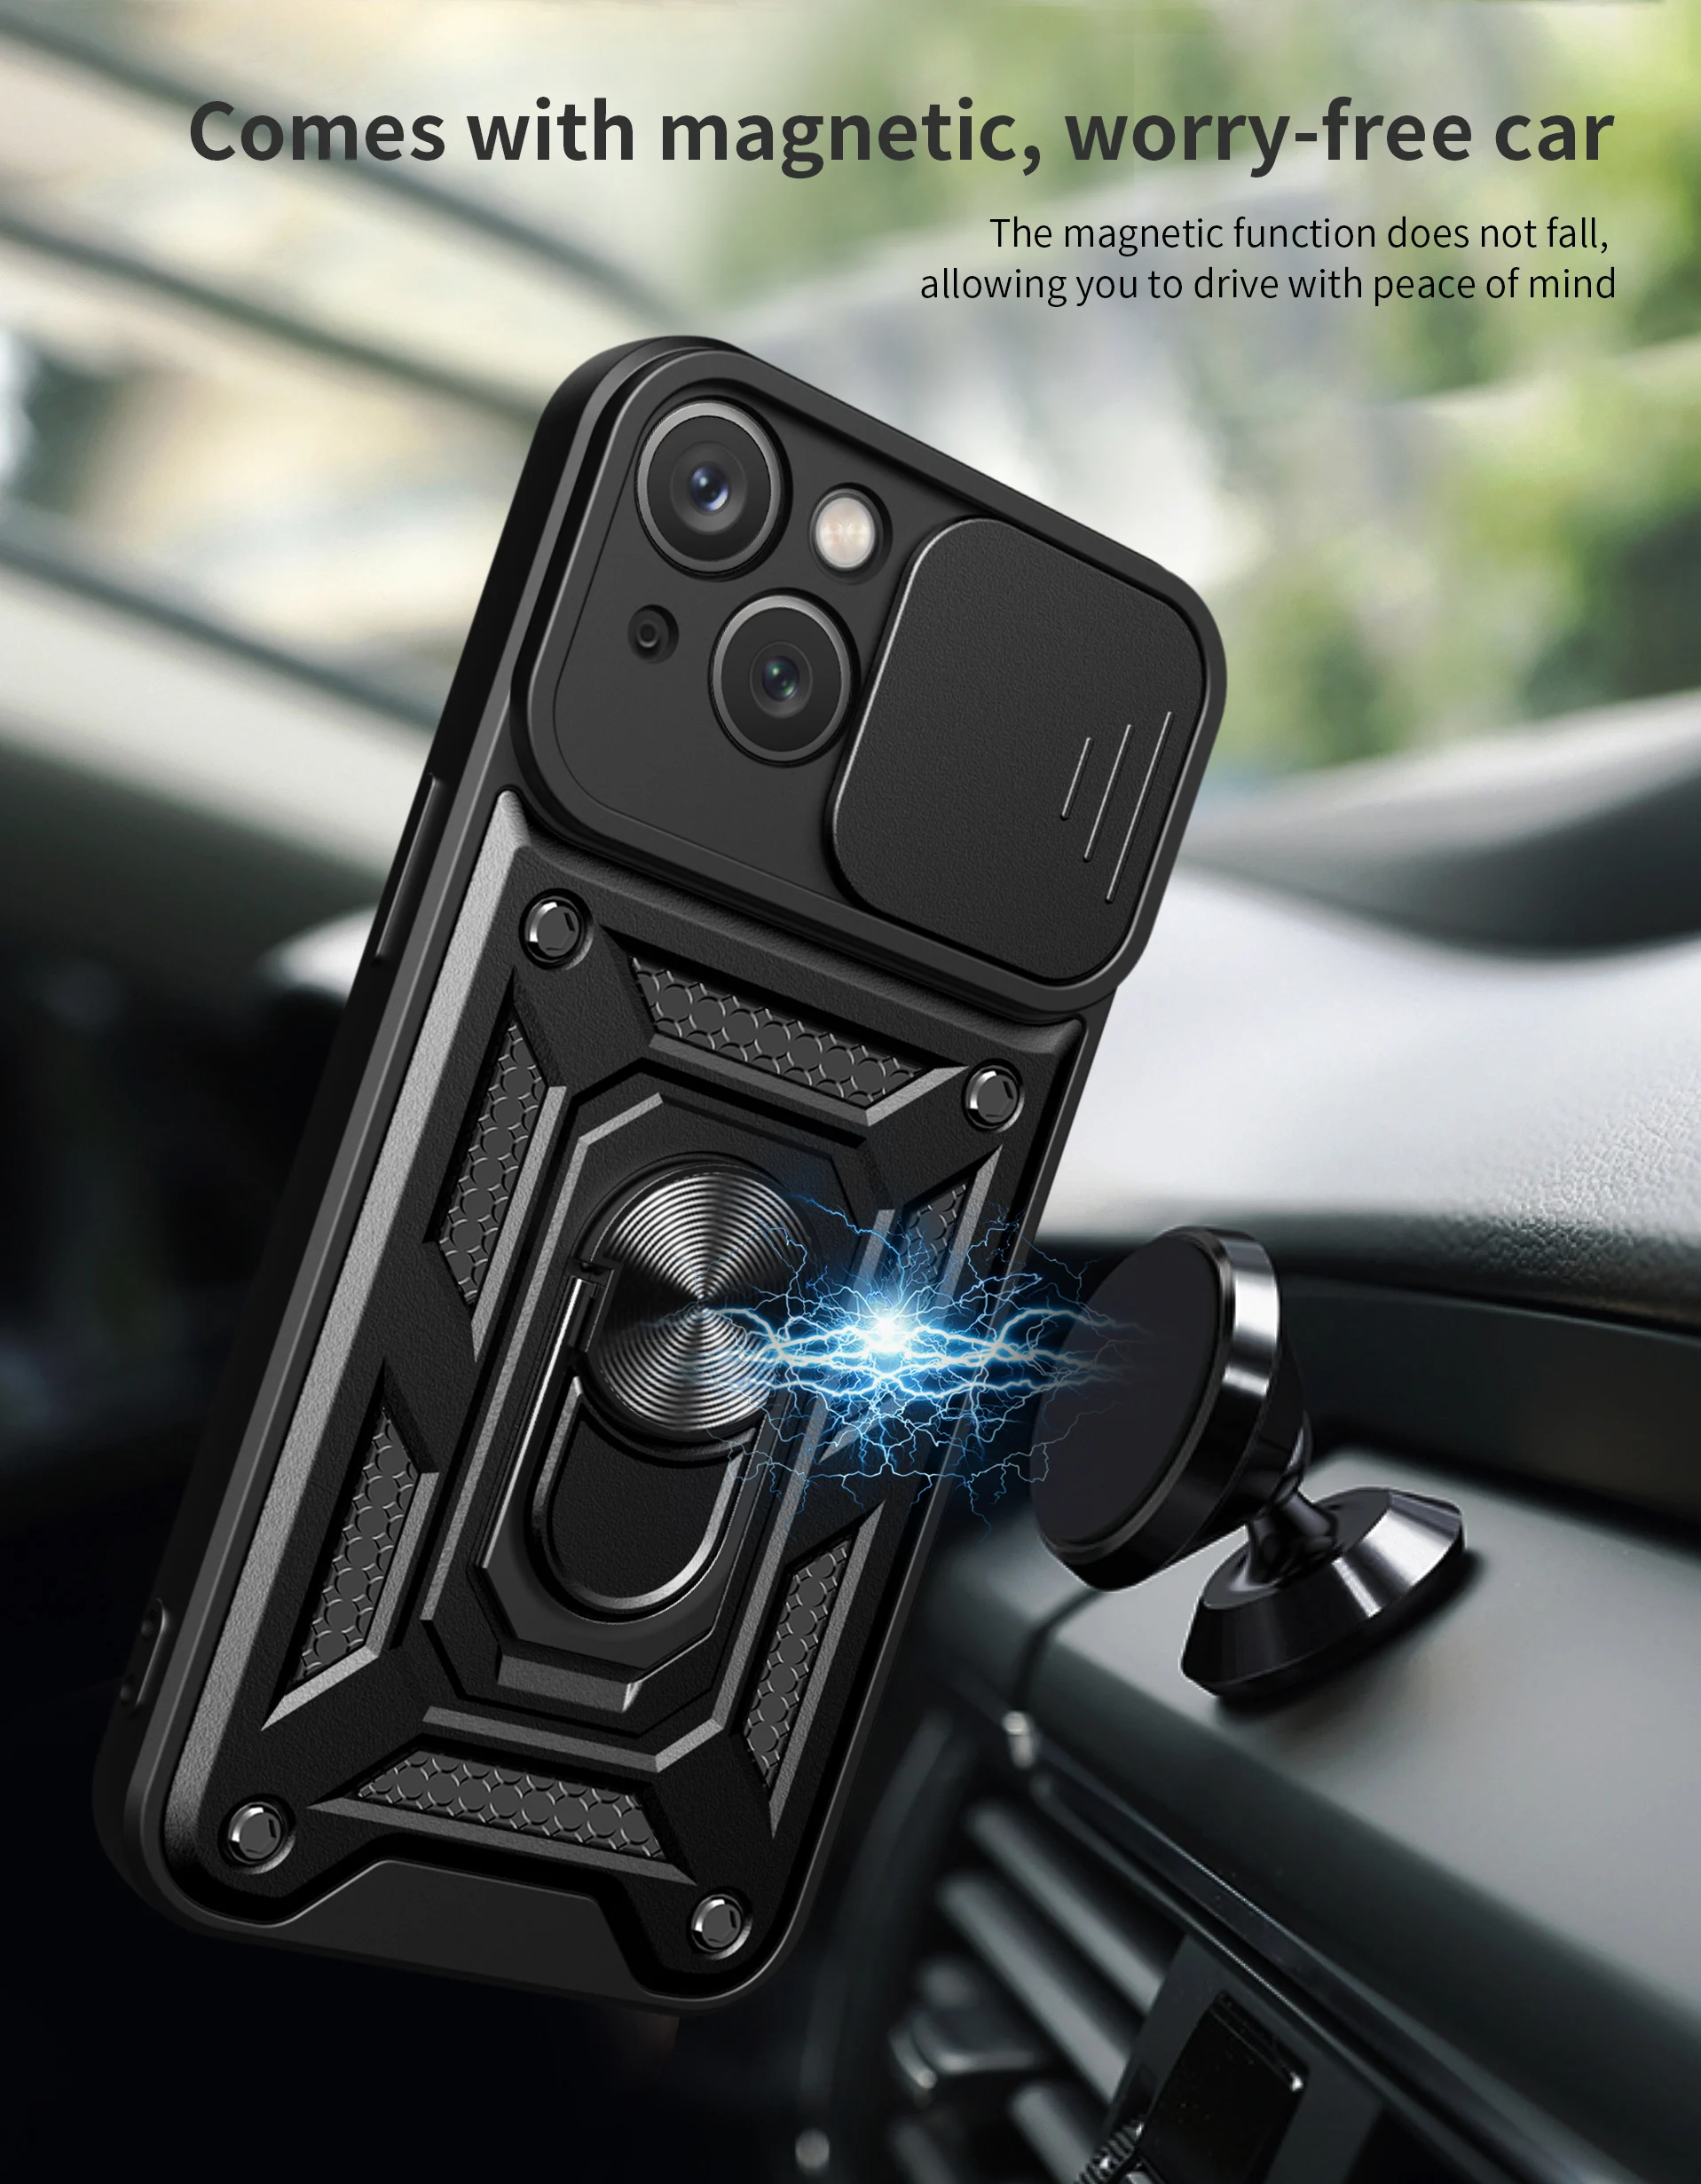 Magnetic phone case for worry free driving- Smart Cell Direct 